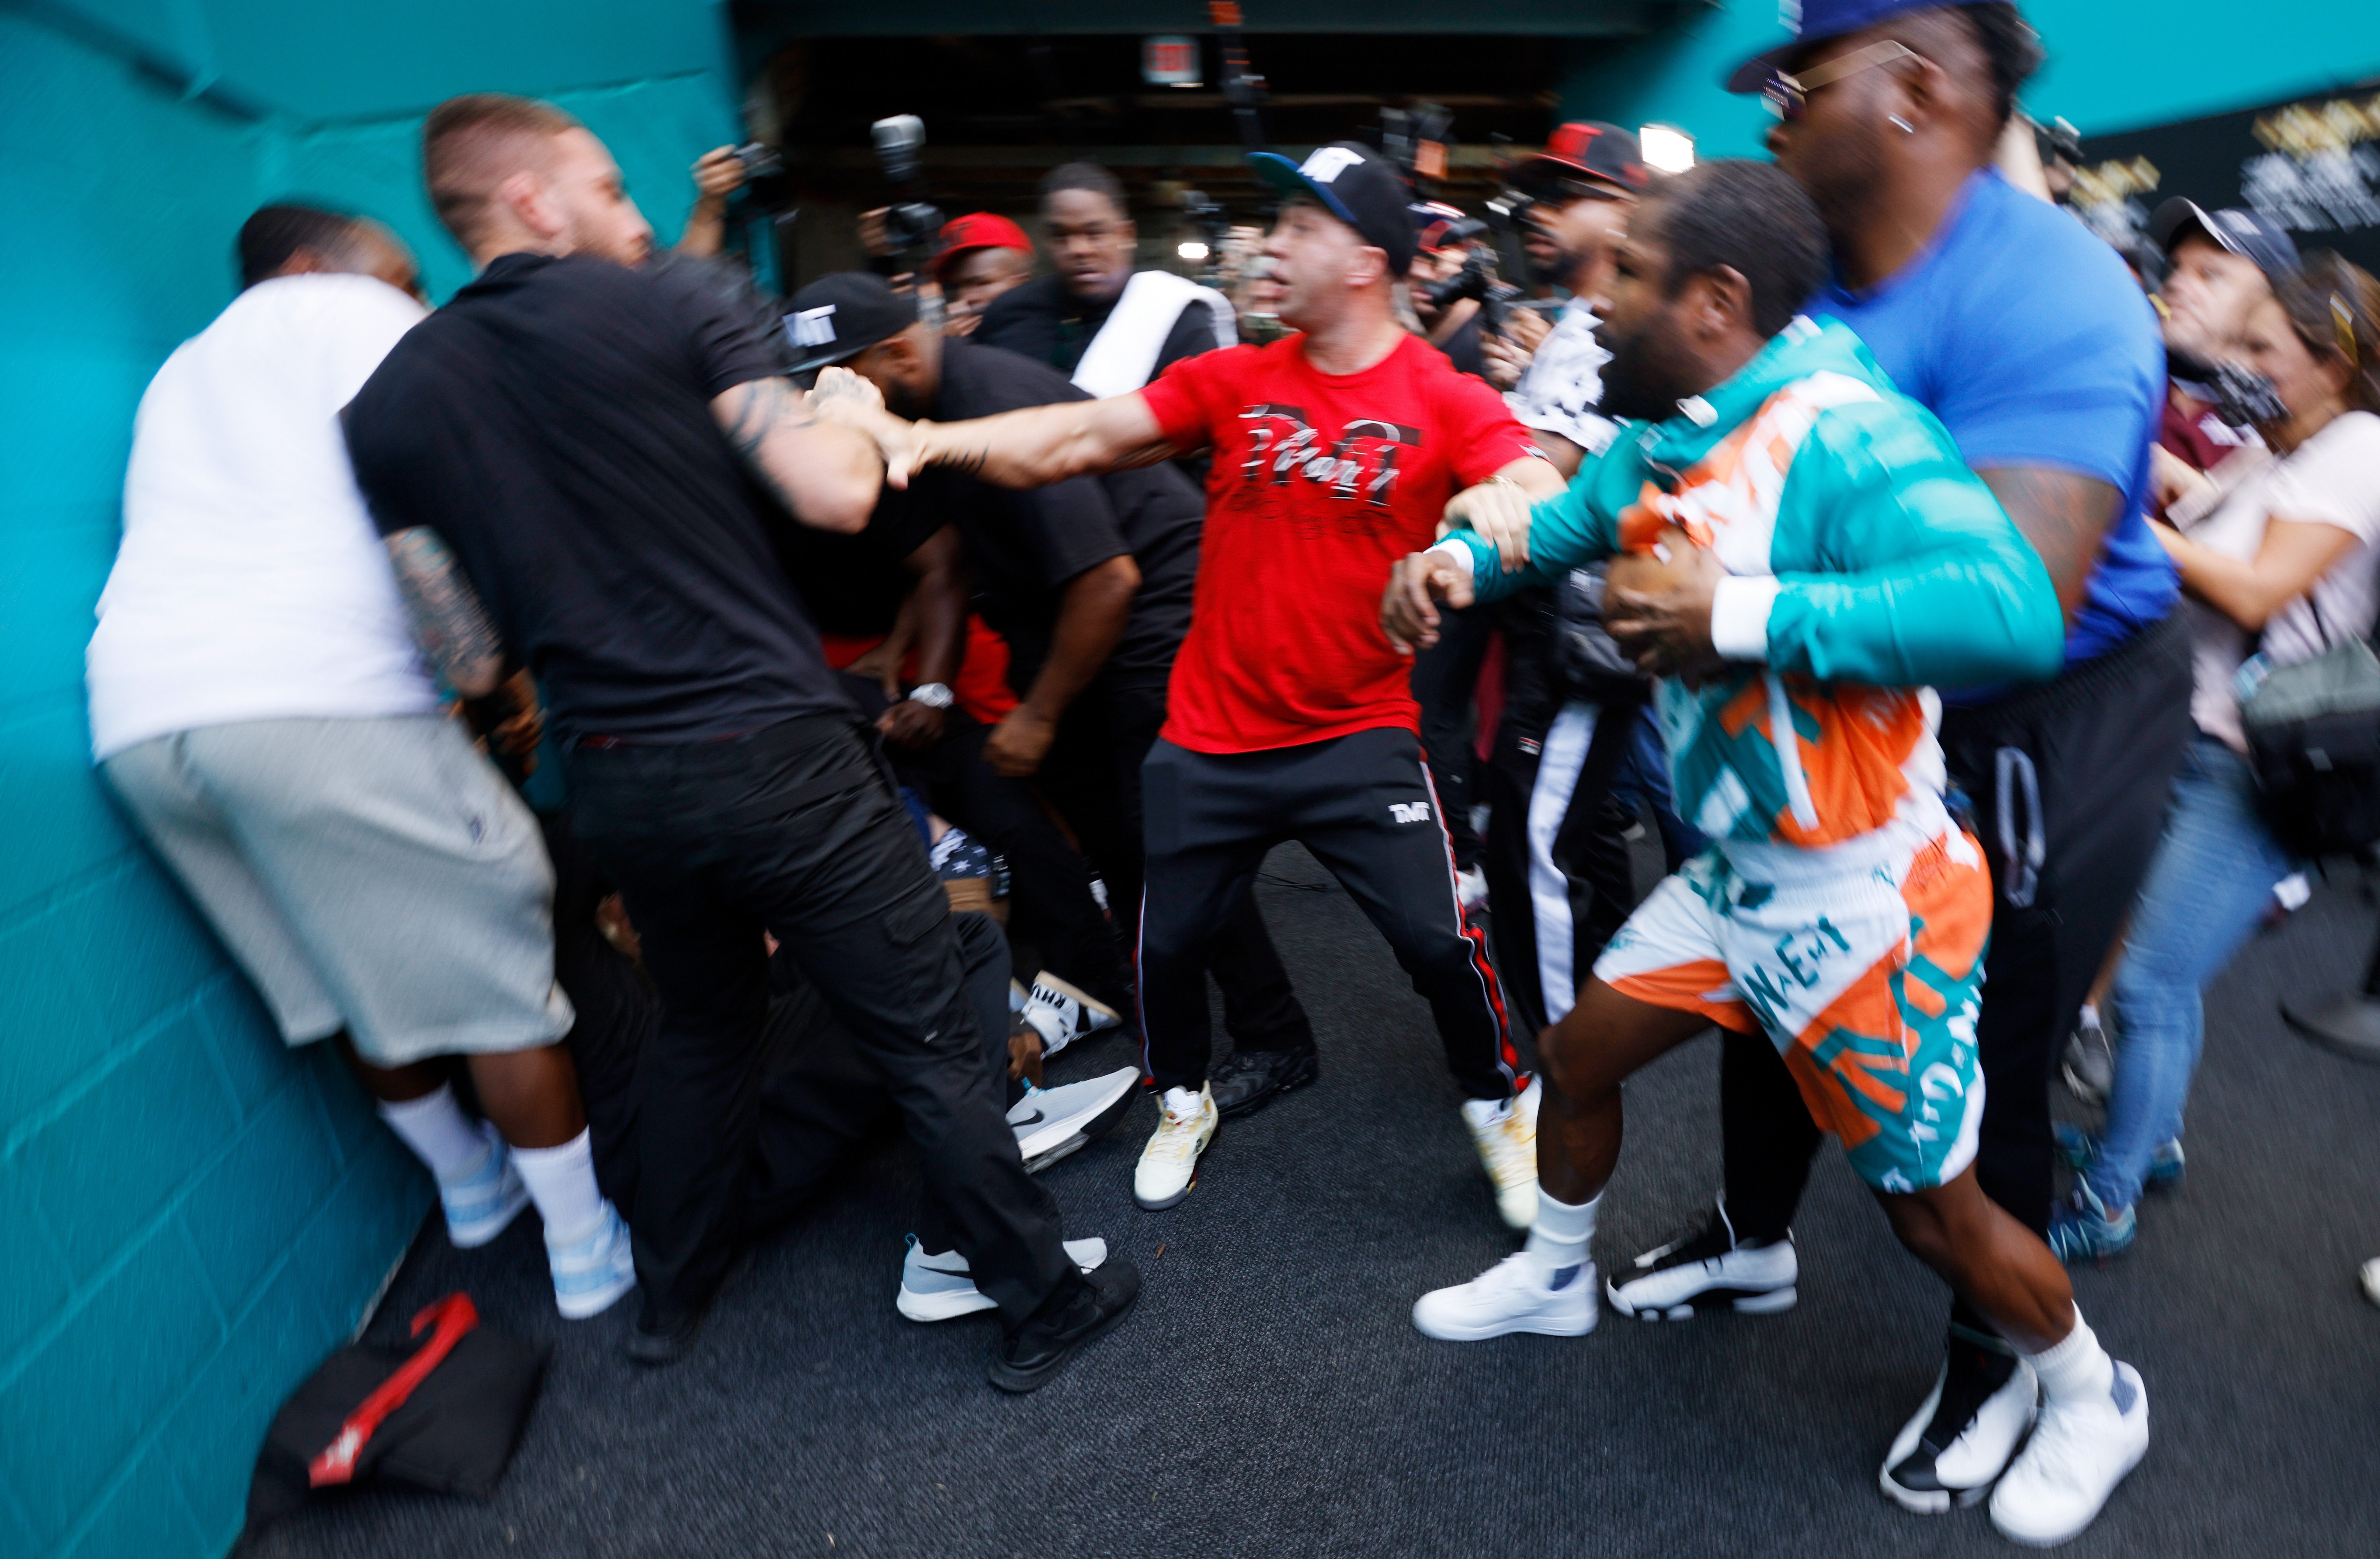 , Jake Paul calls out boxing legend Floyd Mayweather for ‘massive’ catchweight fight to settle beef after Miami brawl